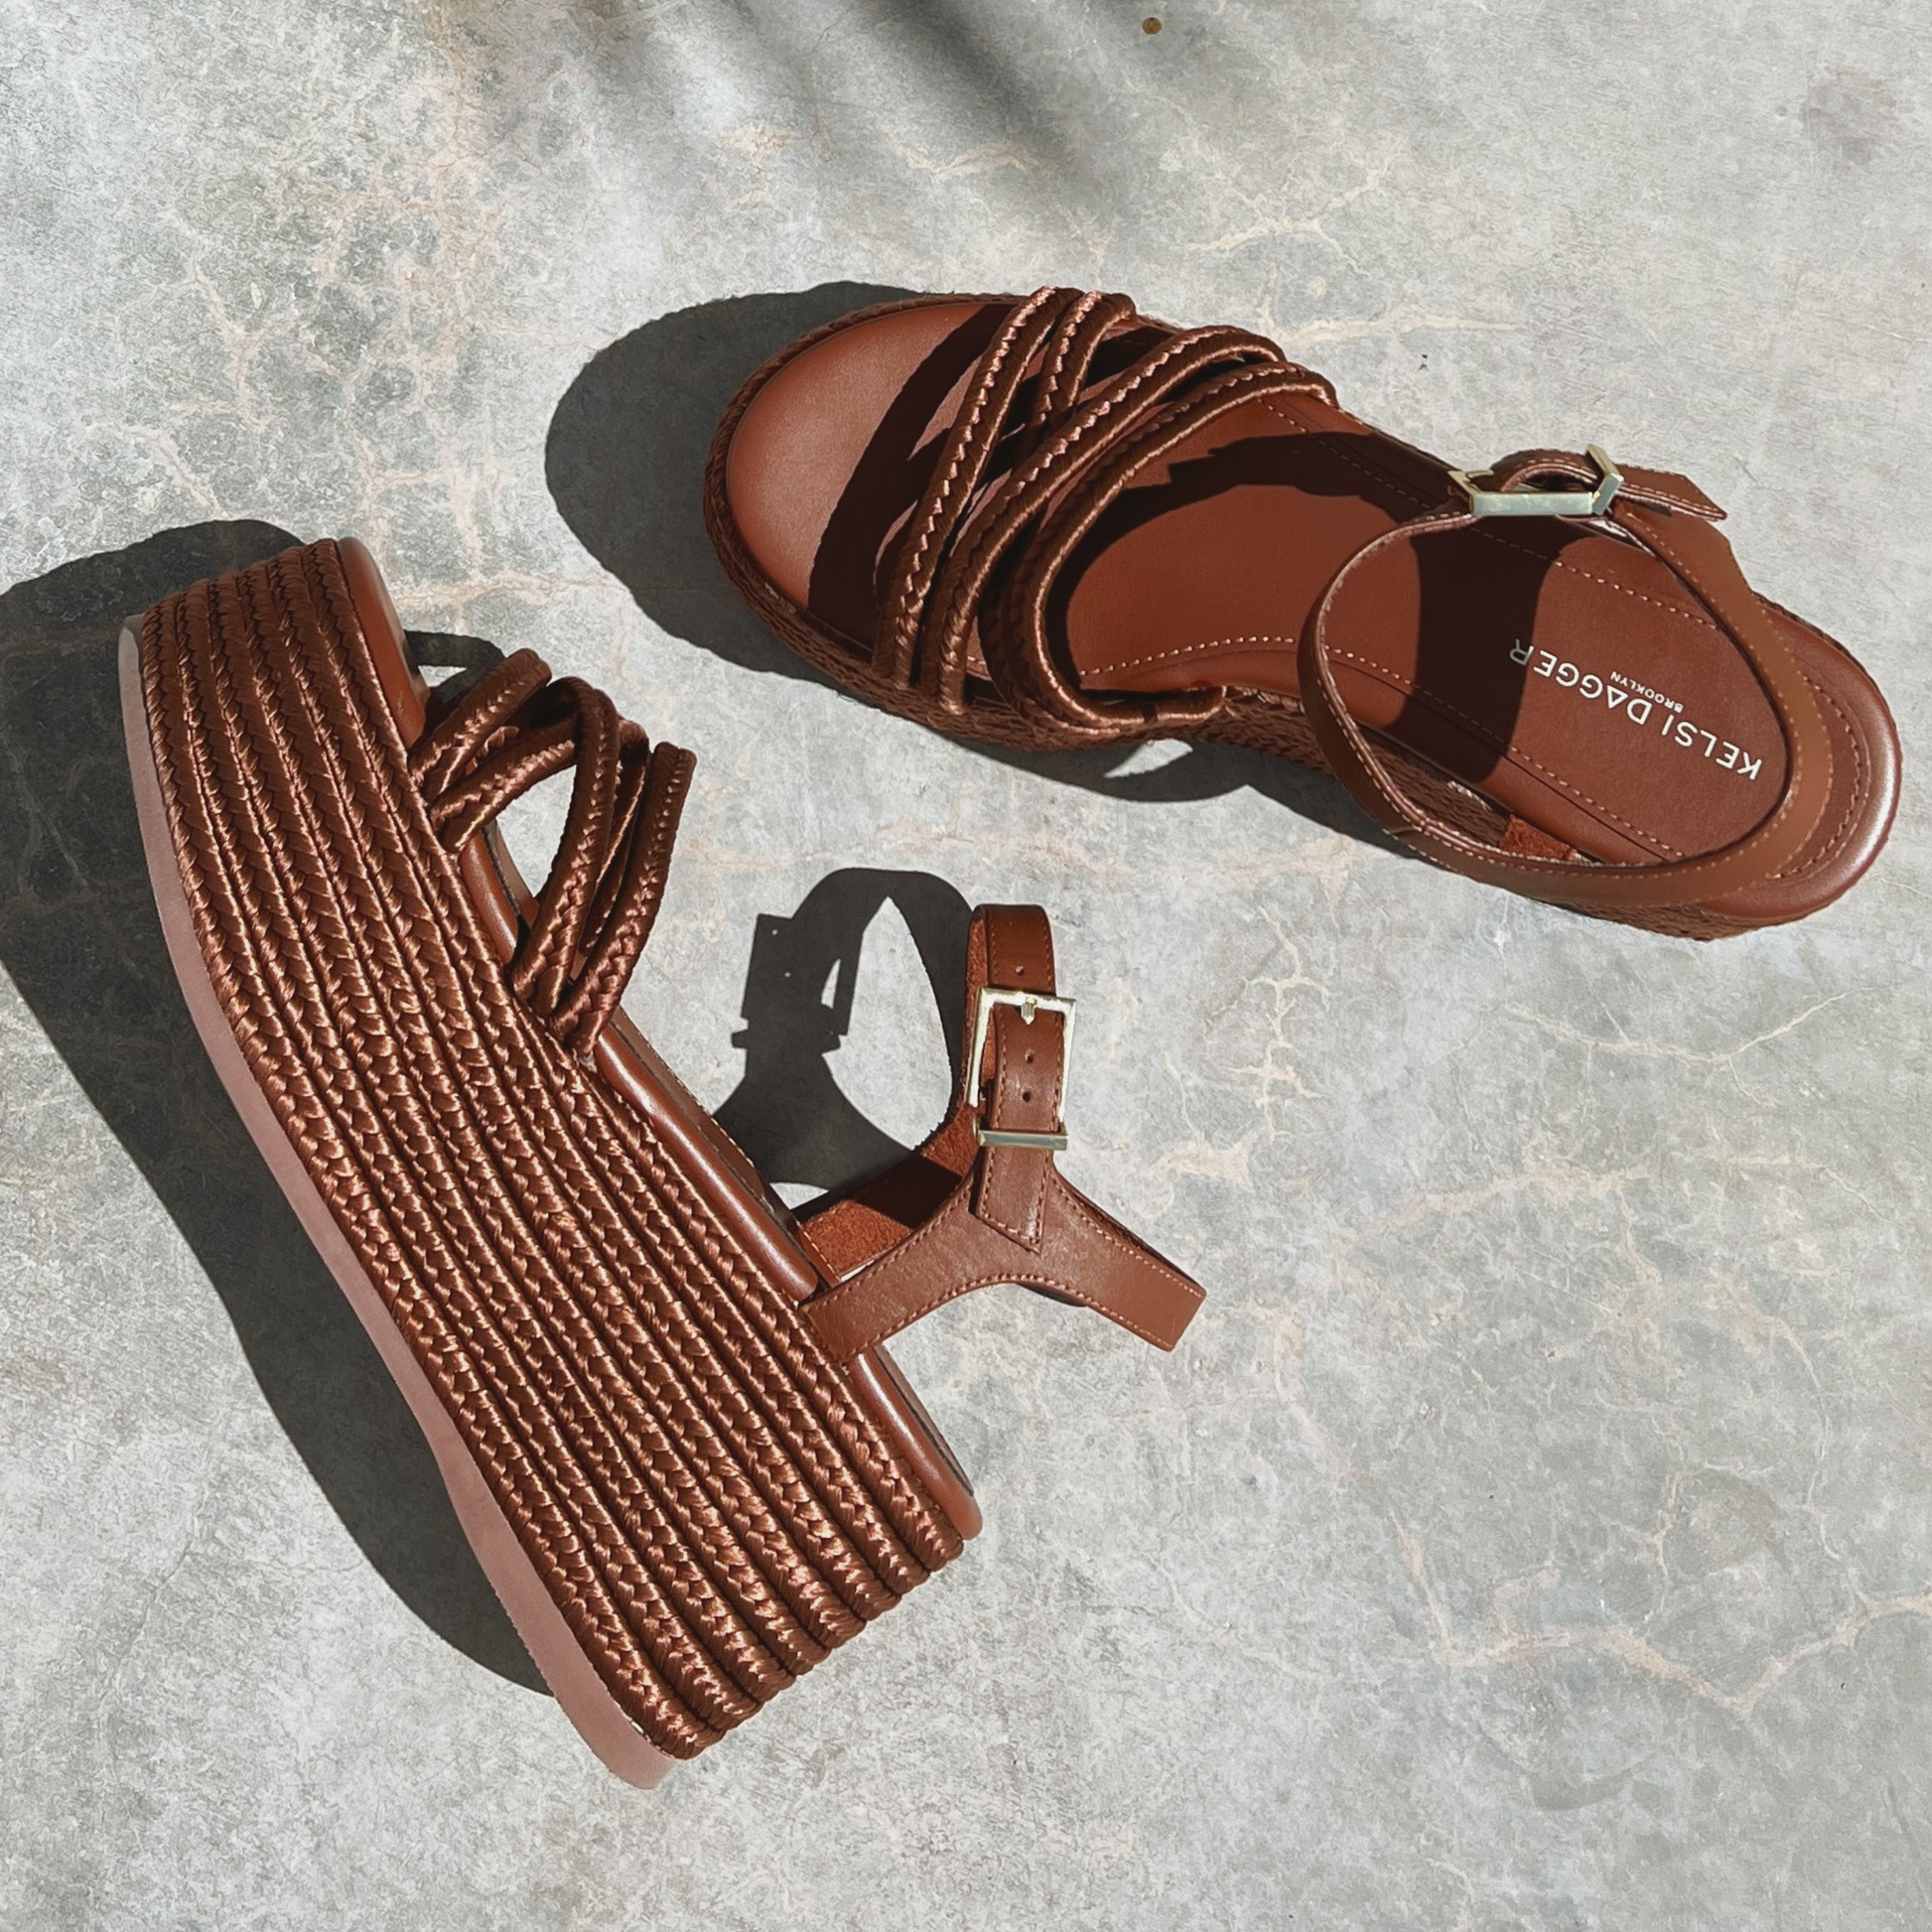 Mend Peanut Braided Wedge Sandal from Kelsi Dagger BK - Stylish and comfortable peanut-colored braided wedge sandal for women.